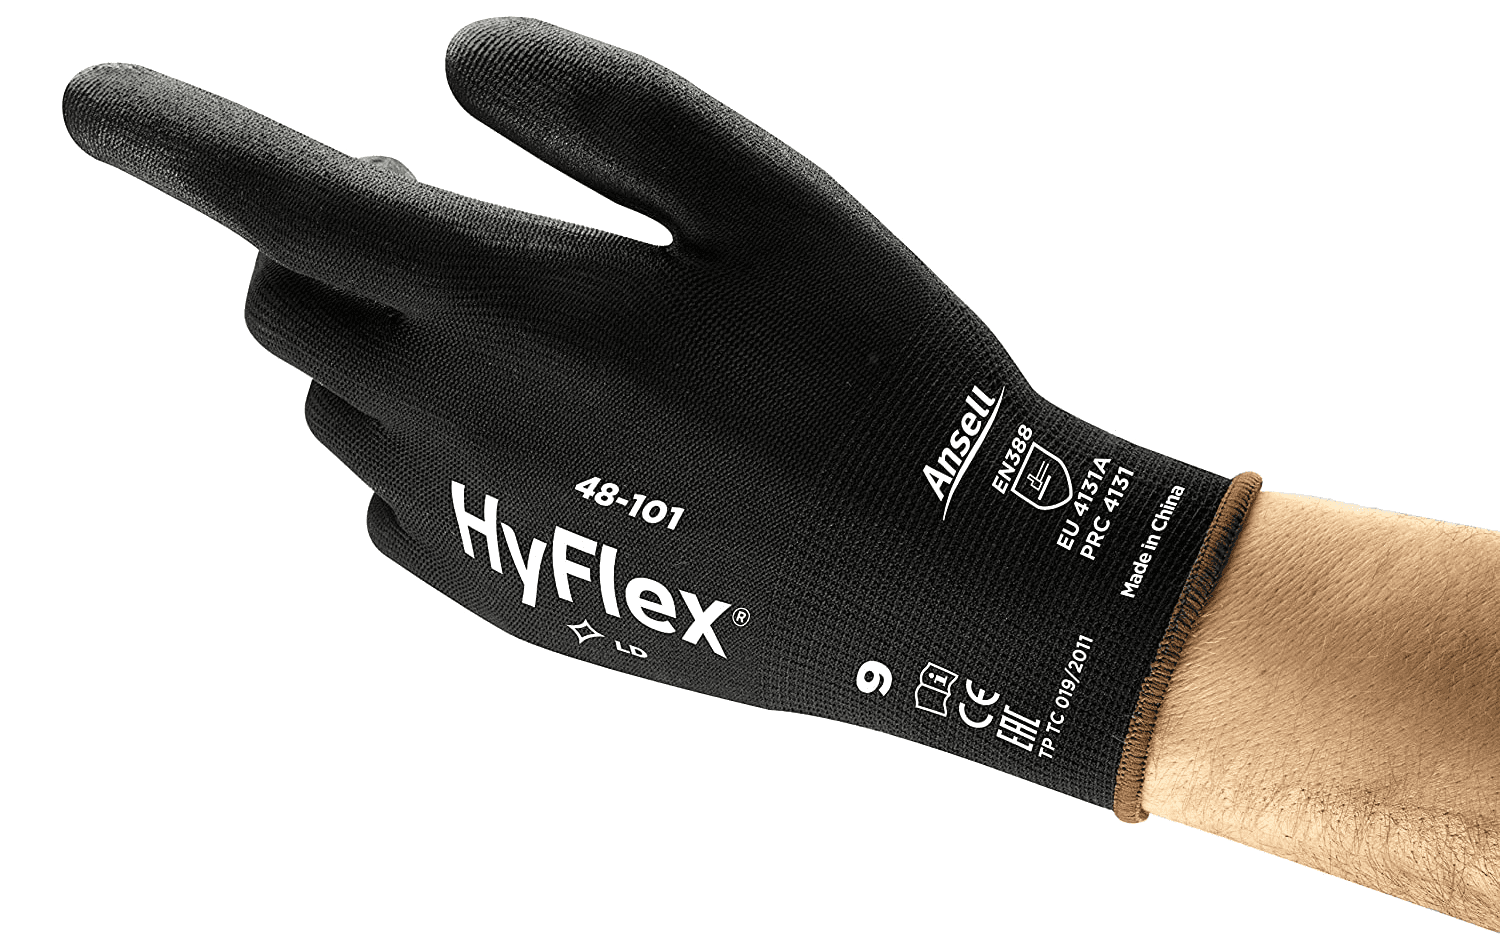 Guantes HyFlex 48-101 Ansell - Pack 12